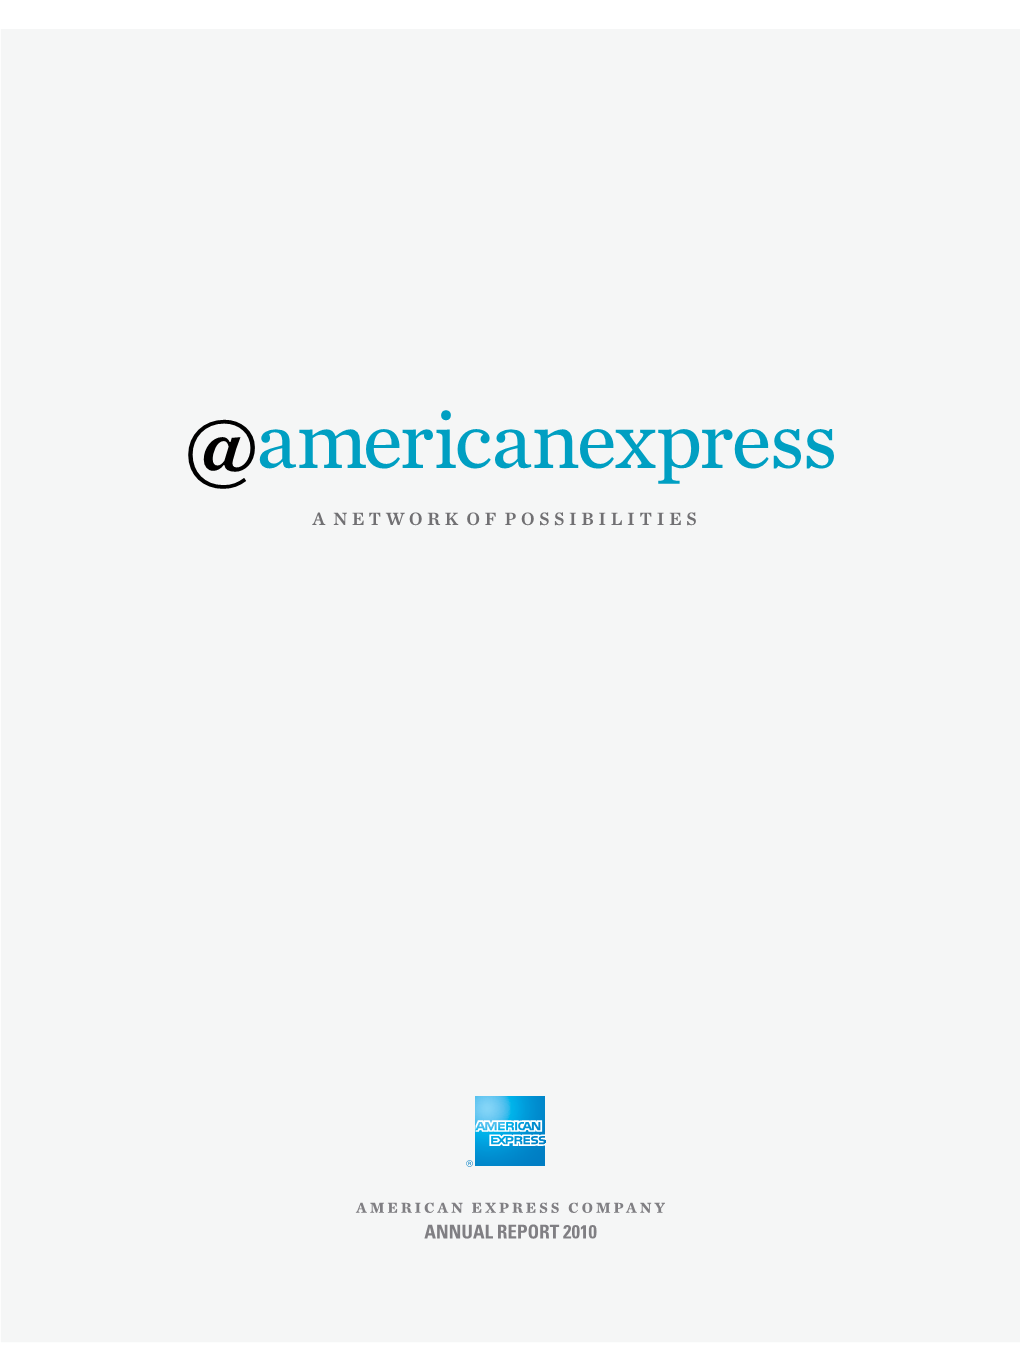 @Americanexpress a Network of Possibilities